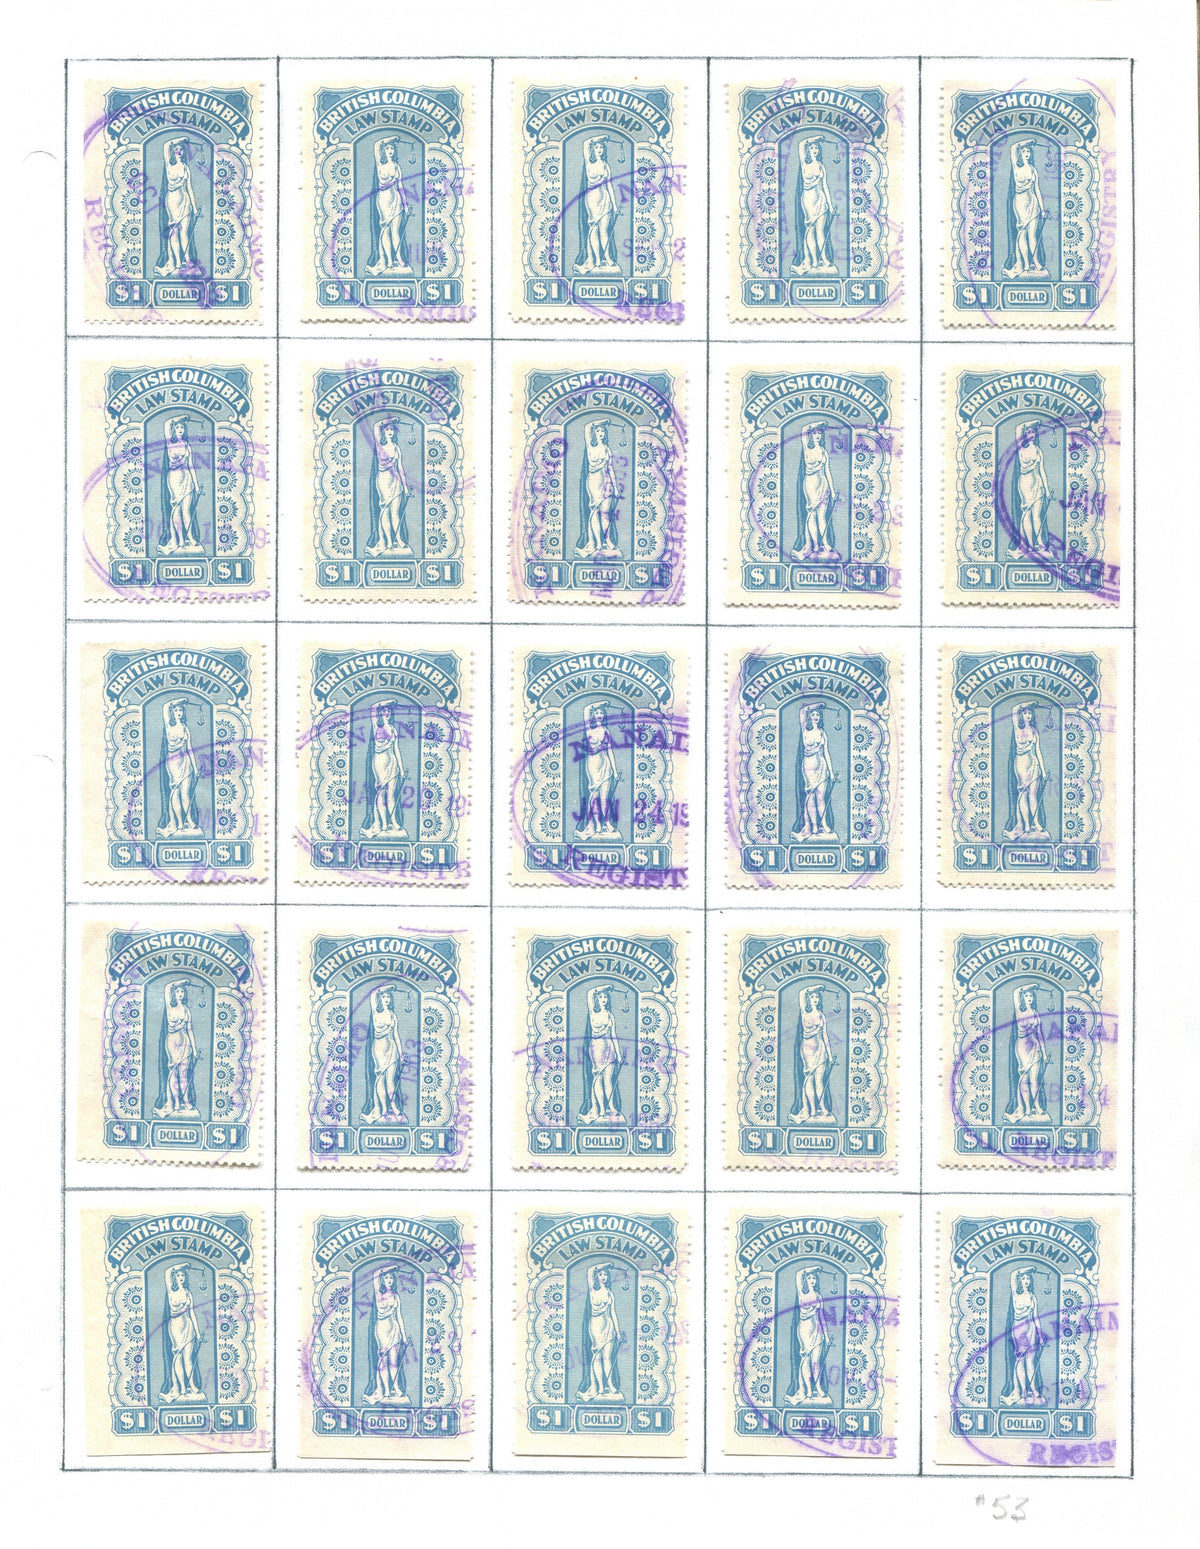 0053BC1709 - BCL53 - Used Reconstructed Sheet